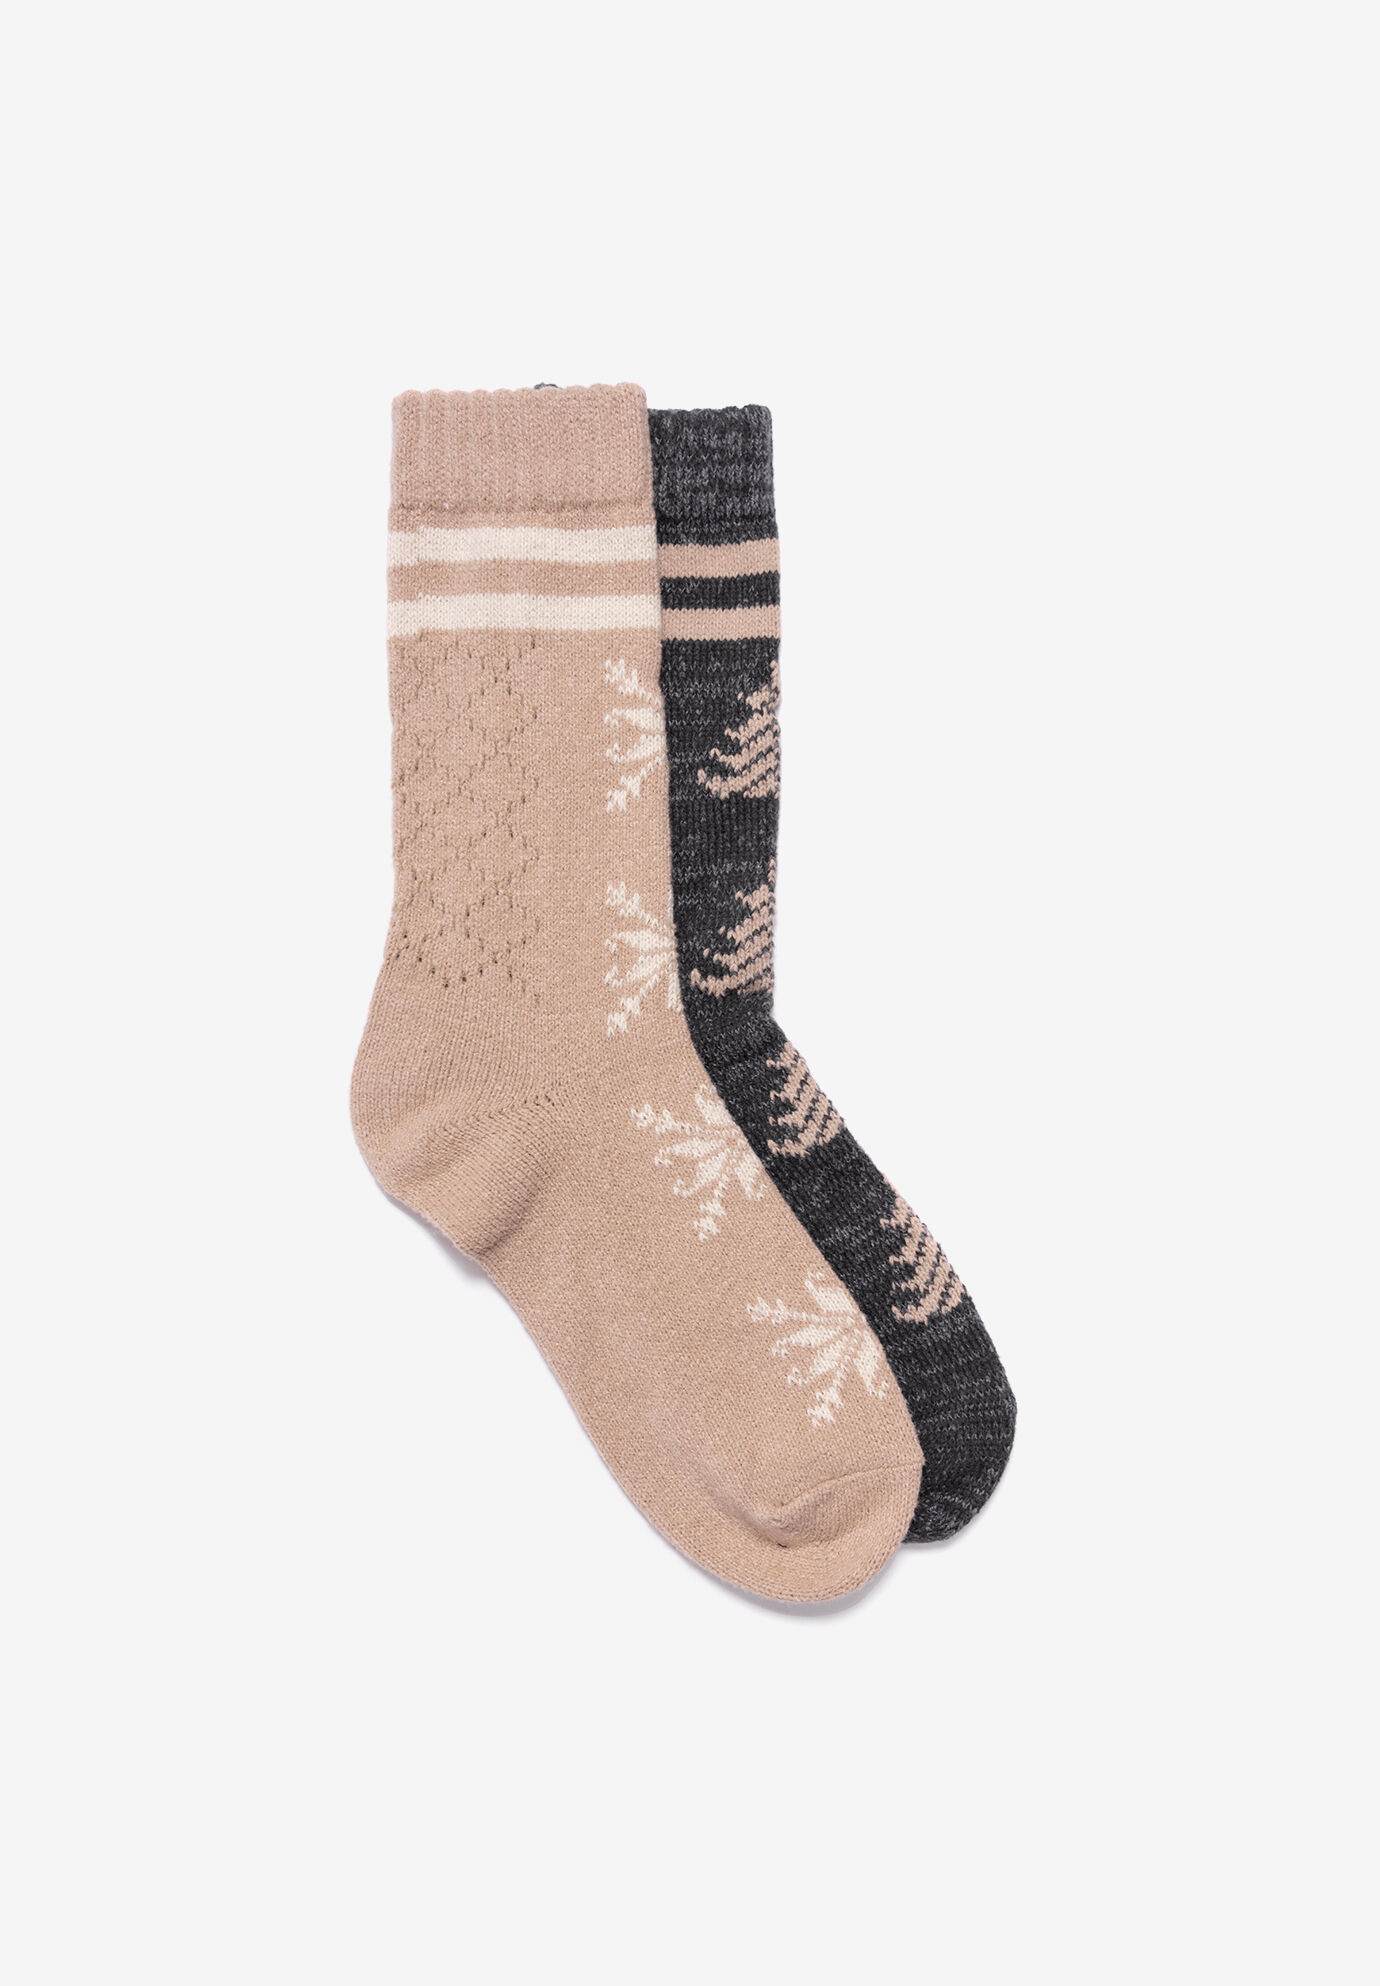 Women's 2 Pair Pack Pointelle Boot Socks by MUK LUKS in Neutral (Size ONE)